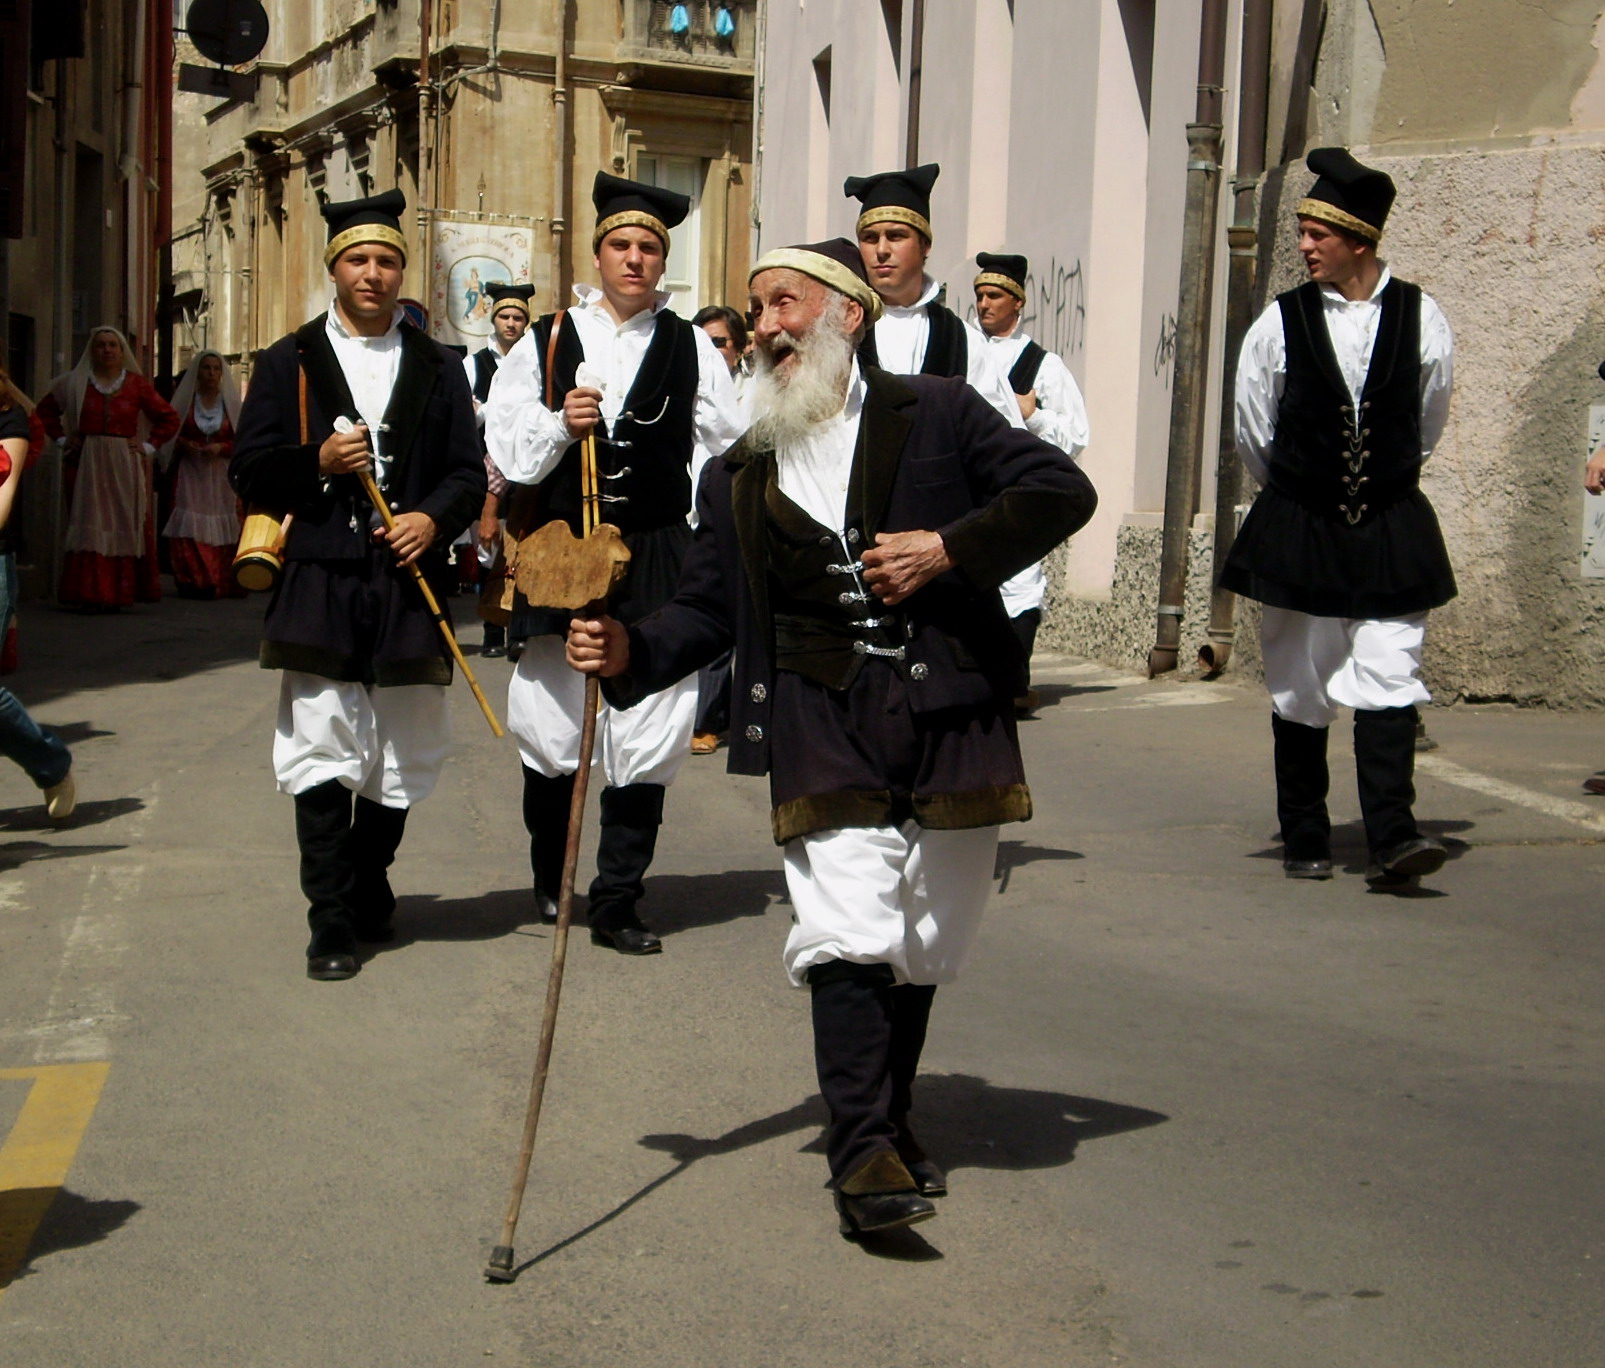 a group of people dressed in traditional clothing walk on a city street